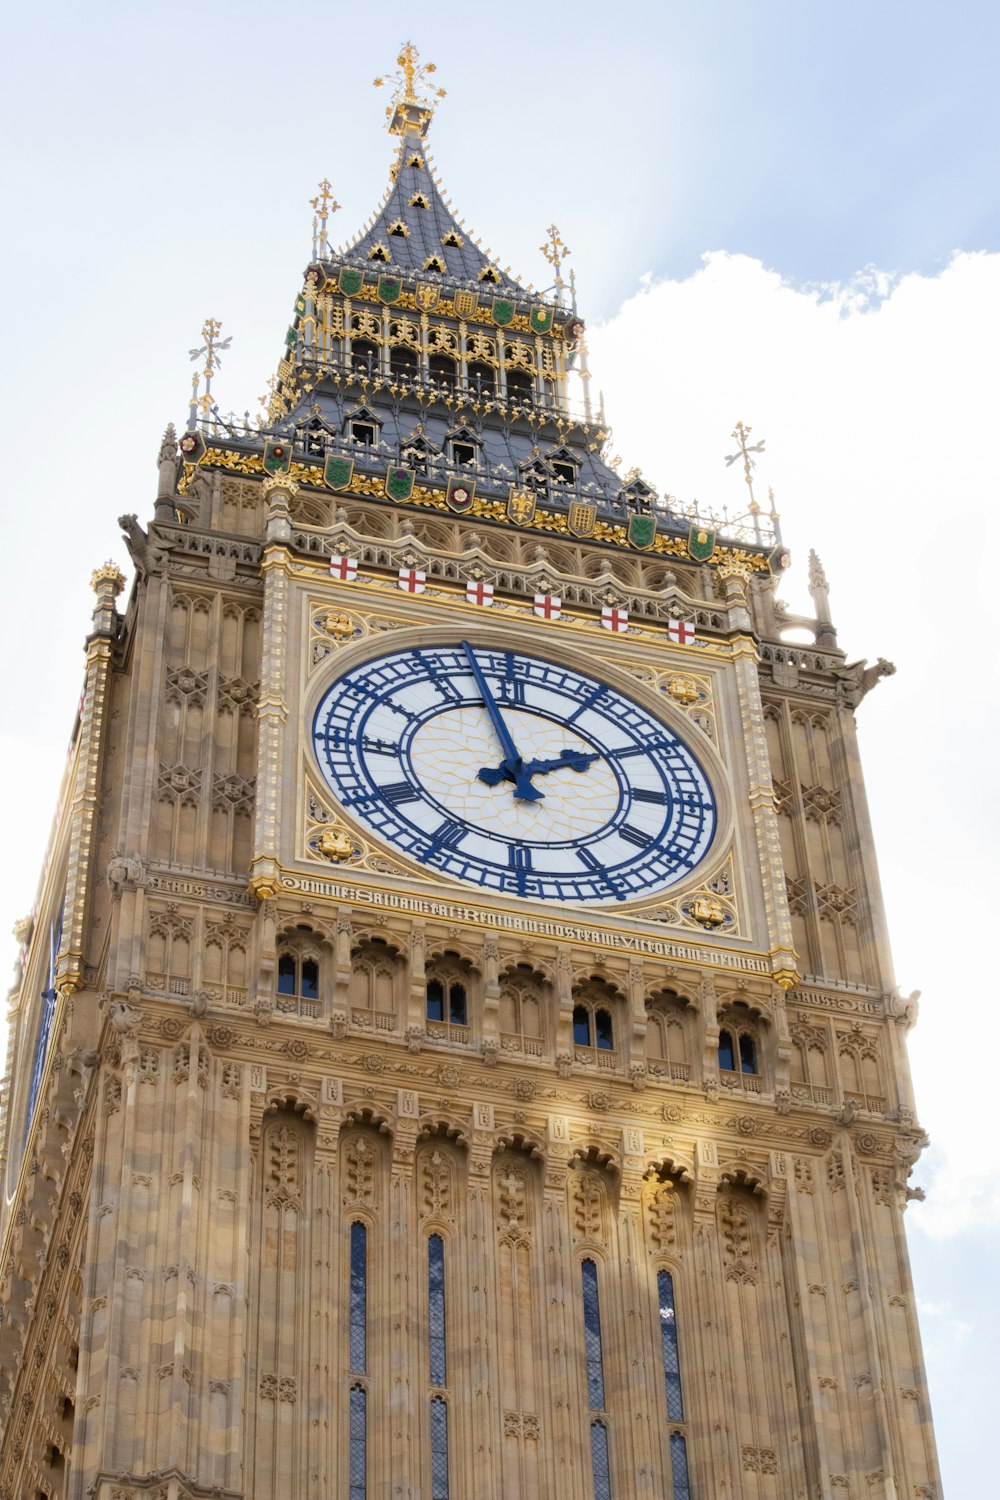 a large clock on a tower